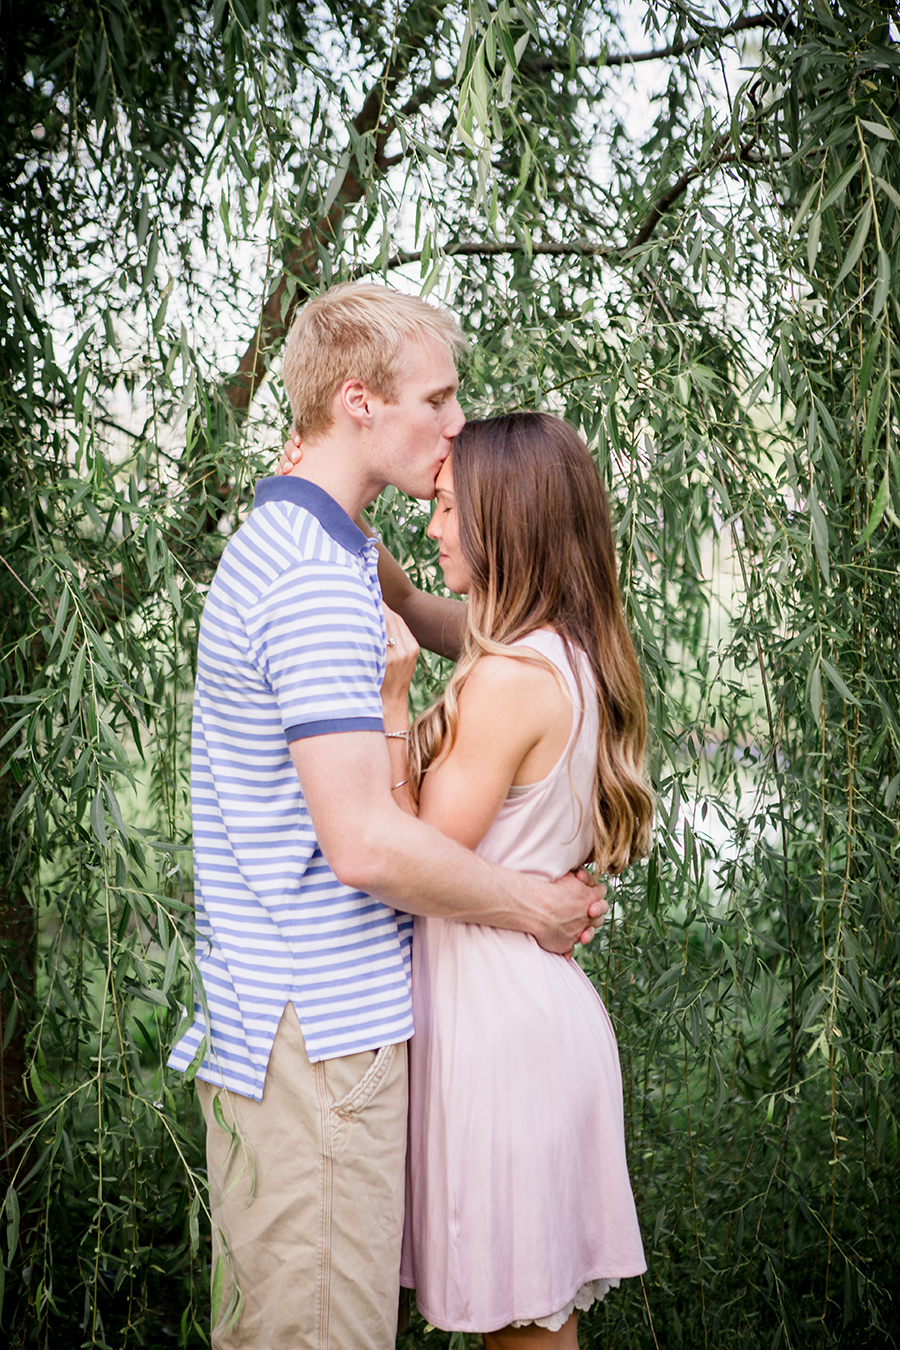 Kissing her forehead under weeping willow engagement photo by Knoxville Wedding Photographer, Amanda May Photos.